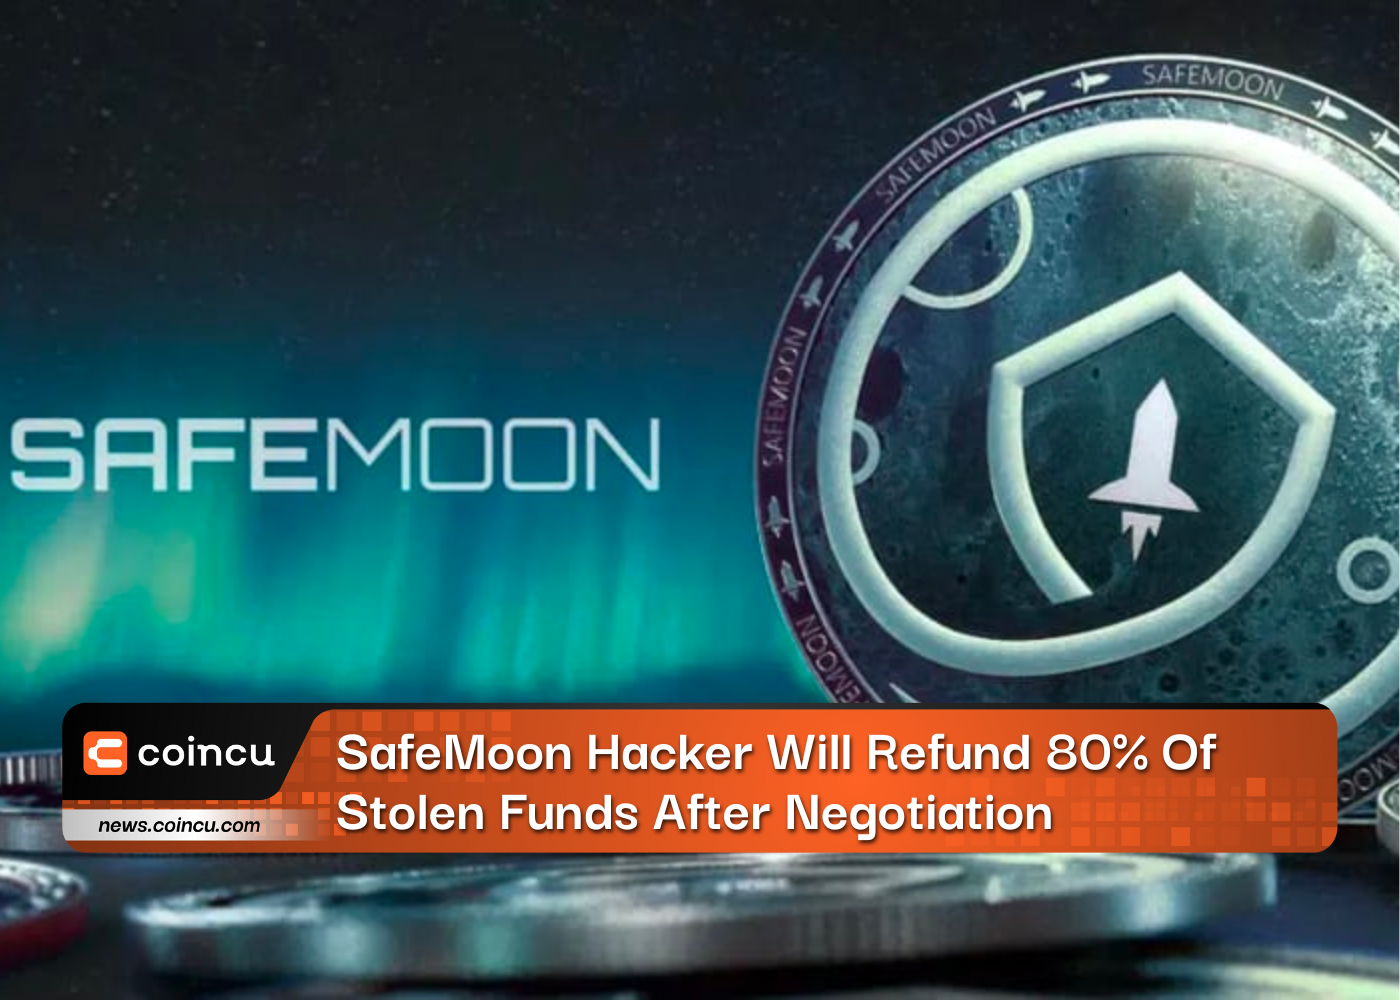 SafeMoon Hacker Will Refund 80% Of Stolen Funds After Negotiation